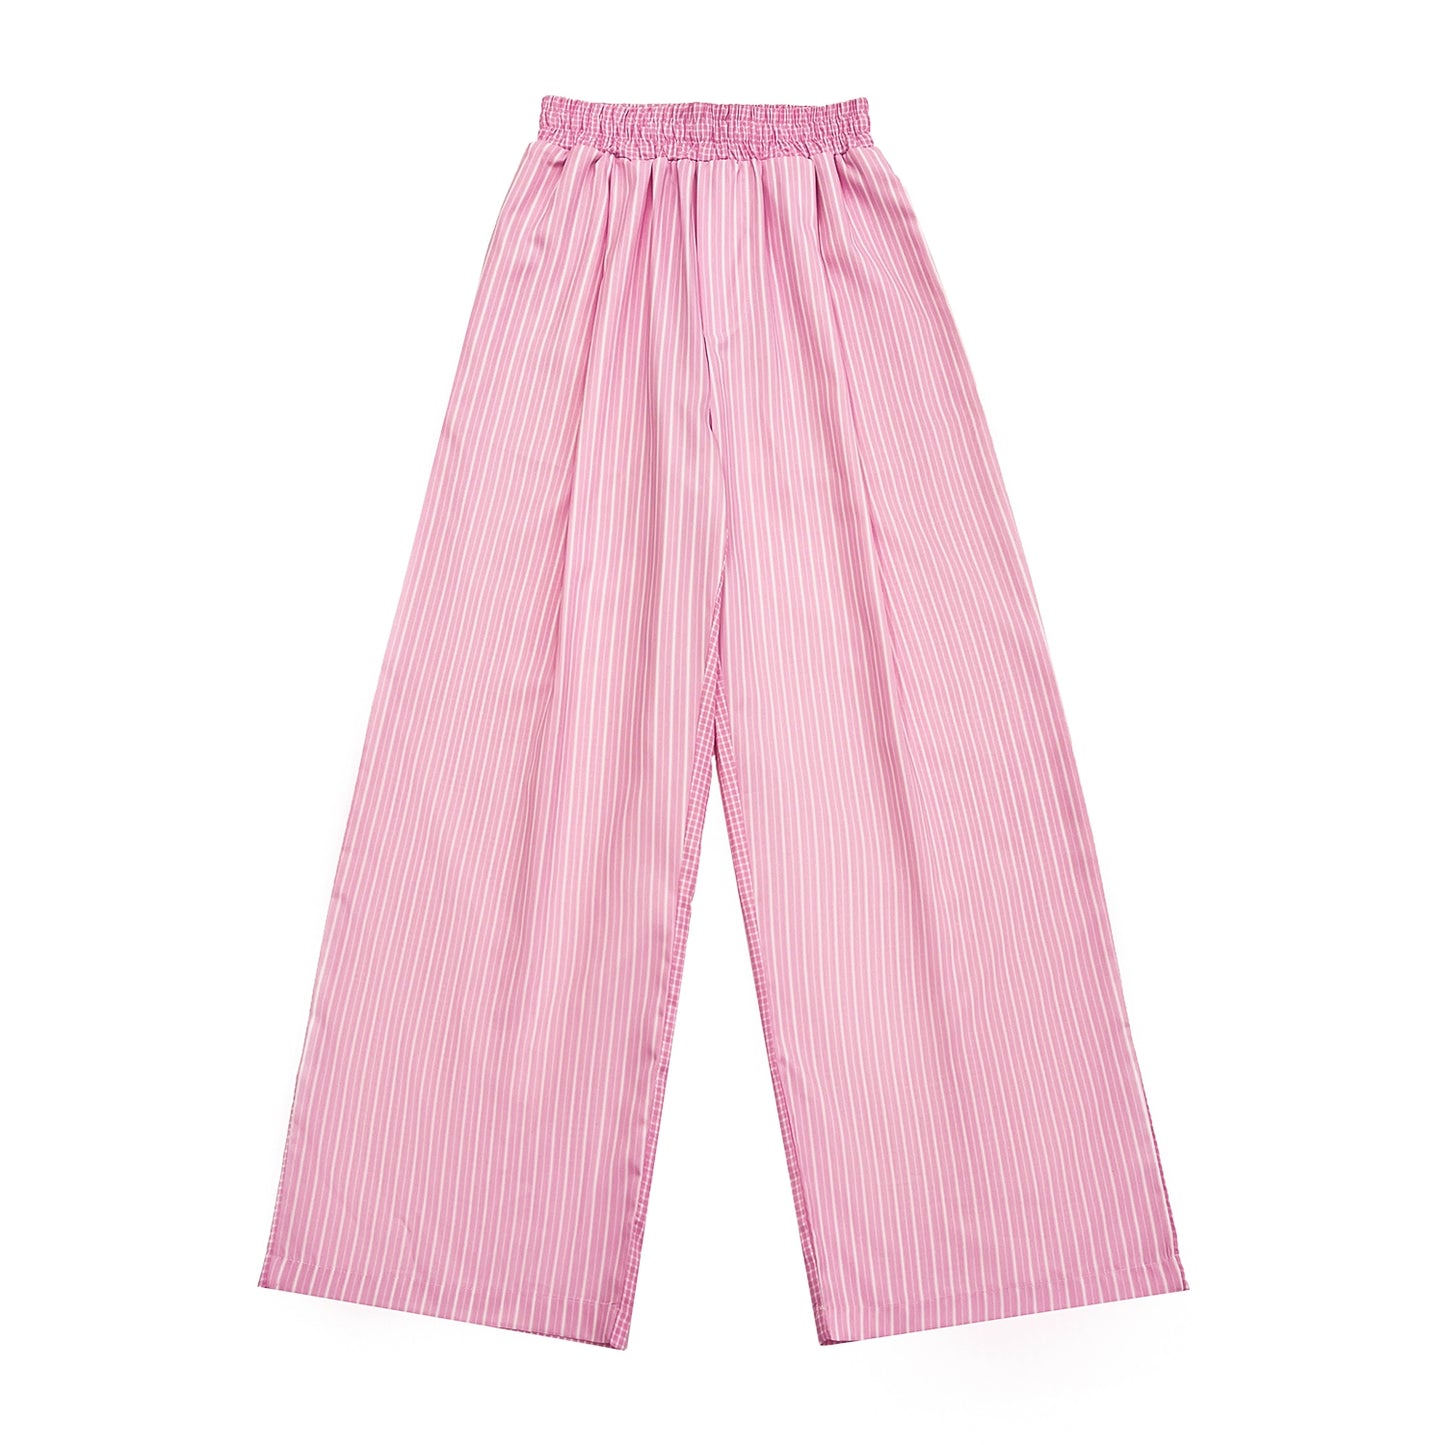 MICHINNYON blue/pink spring/summer casual striped loose slouchy elasticated waistband refreshing light color simple trousers